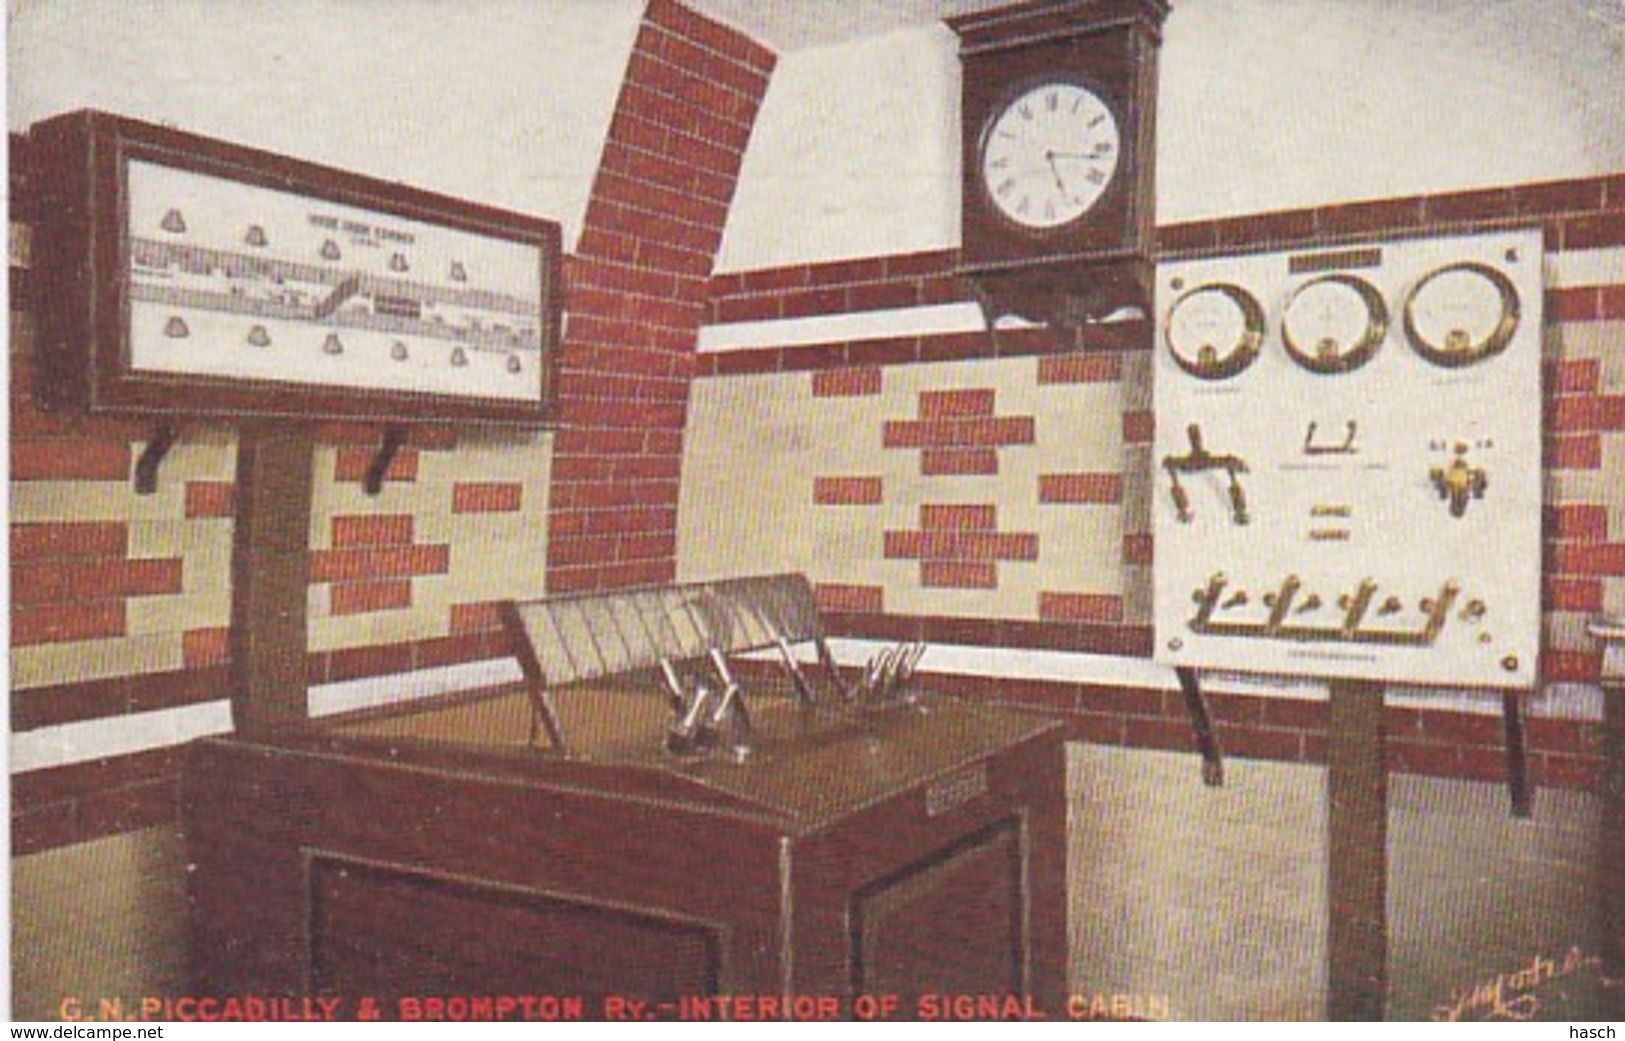 2810	78	London’s Latest Tube, G.N. Piccadilly & Brompton Ry.- Interior Of Signal Cabin. (see Corners) - Eisenbahnen